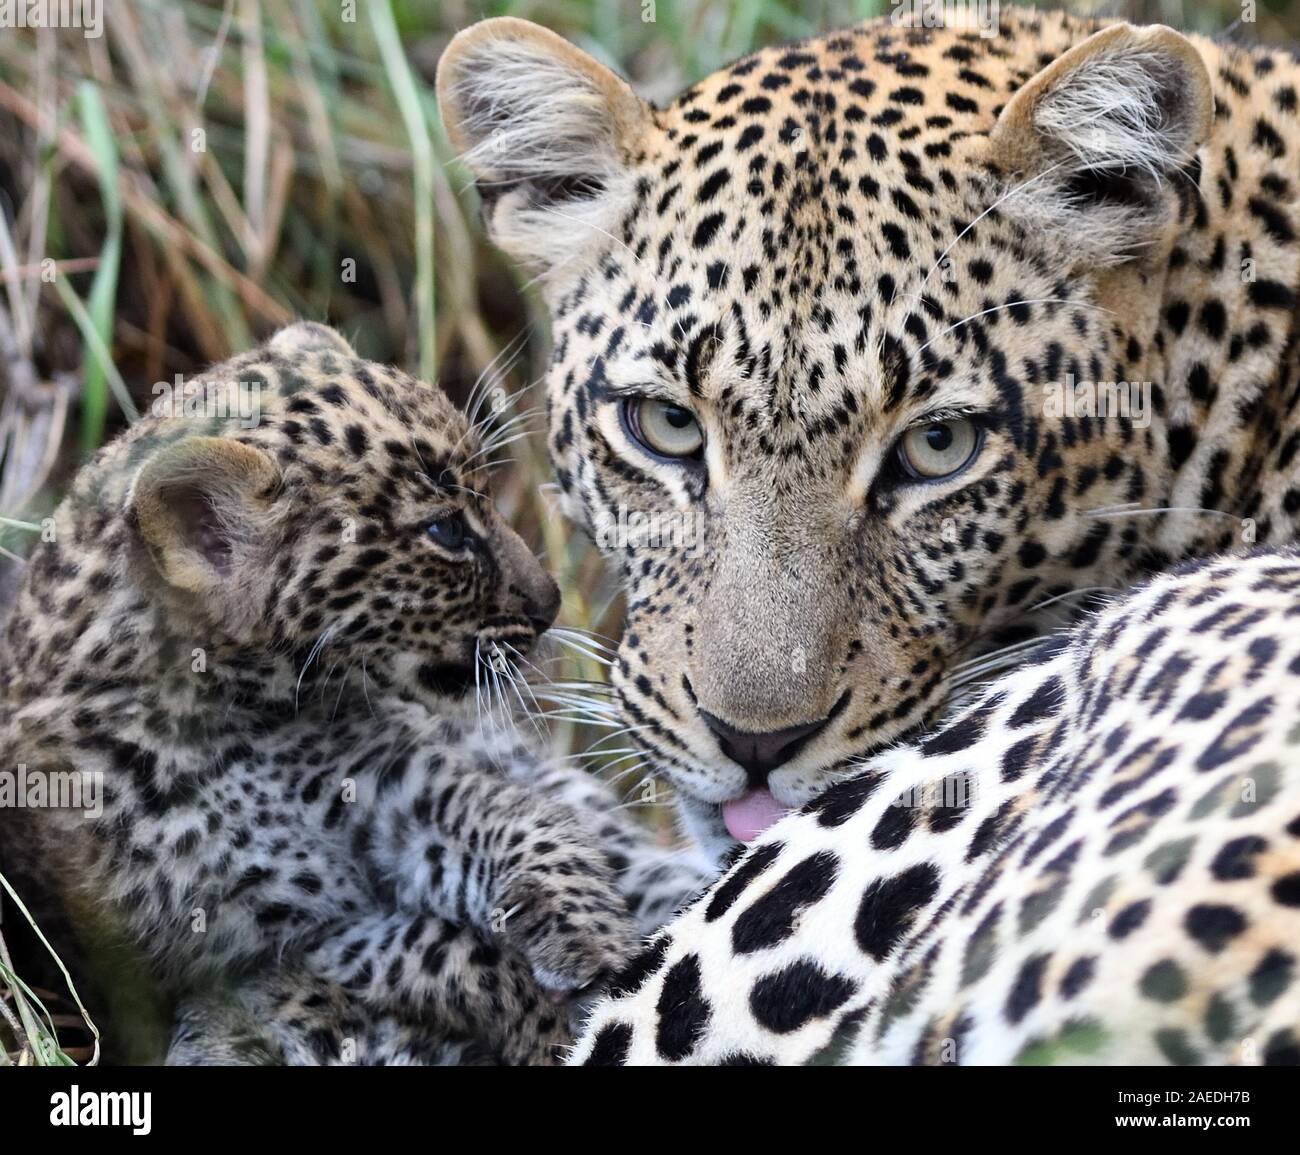 A female leopard (Panthera pardus) with her very young cub, its eyes still blue,  outside their  den. Serengeti National Park, Tanzania. Stock Photo